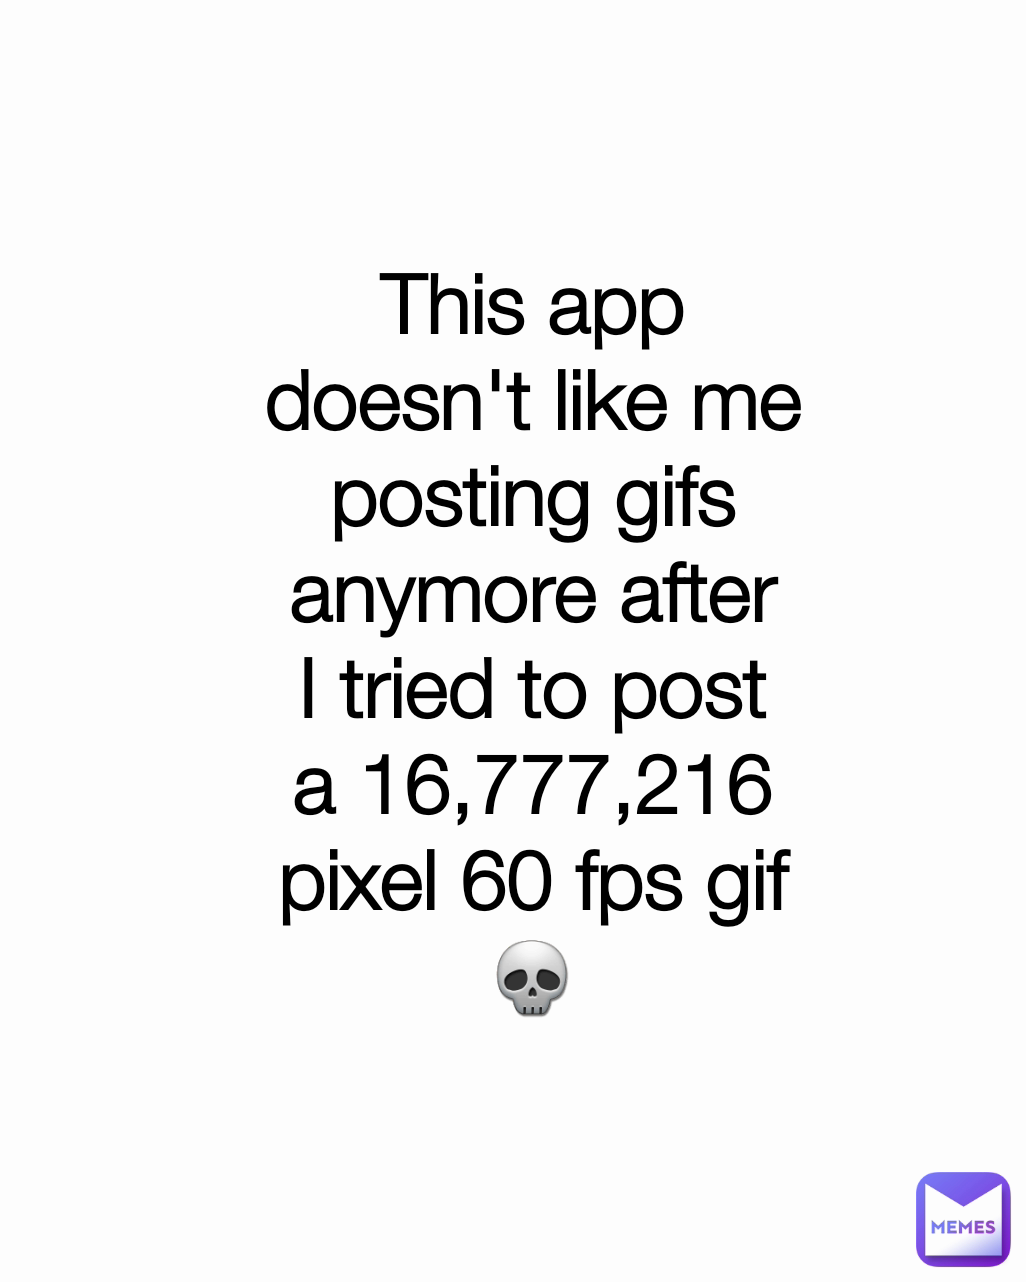 This app doesn't like me posting gifs anymore after I tried to post a 16,777,216 pixel 60 fps gif💀